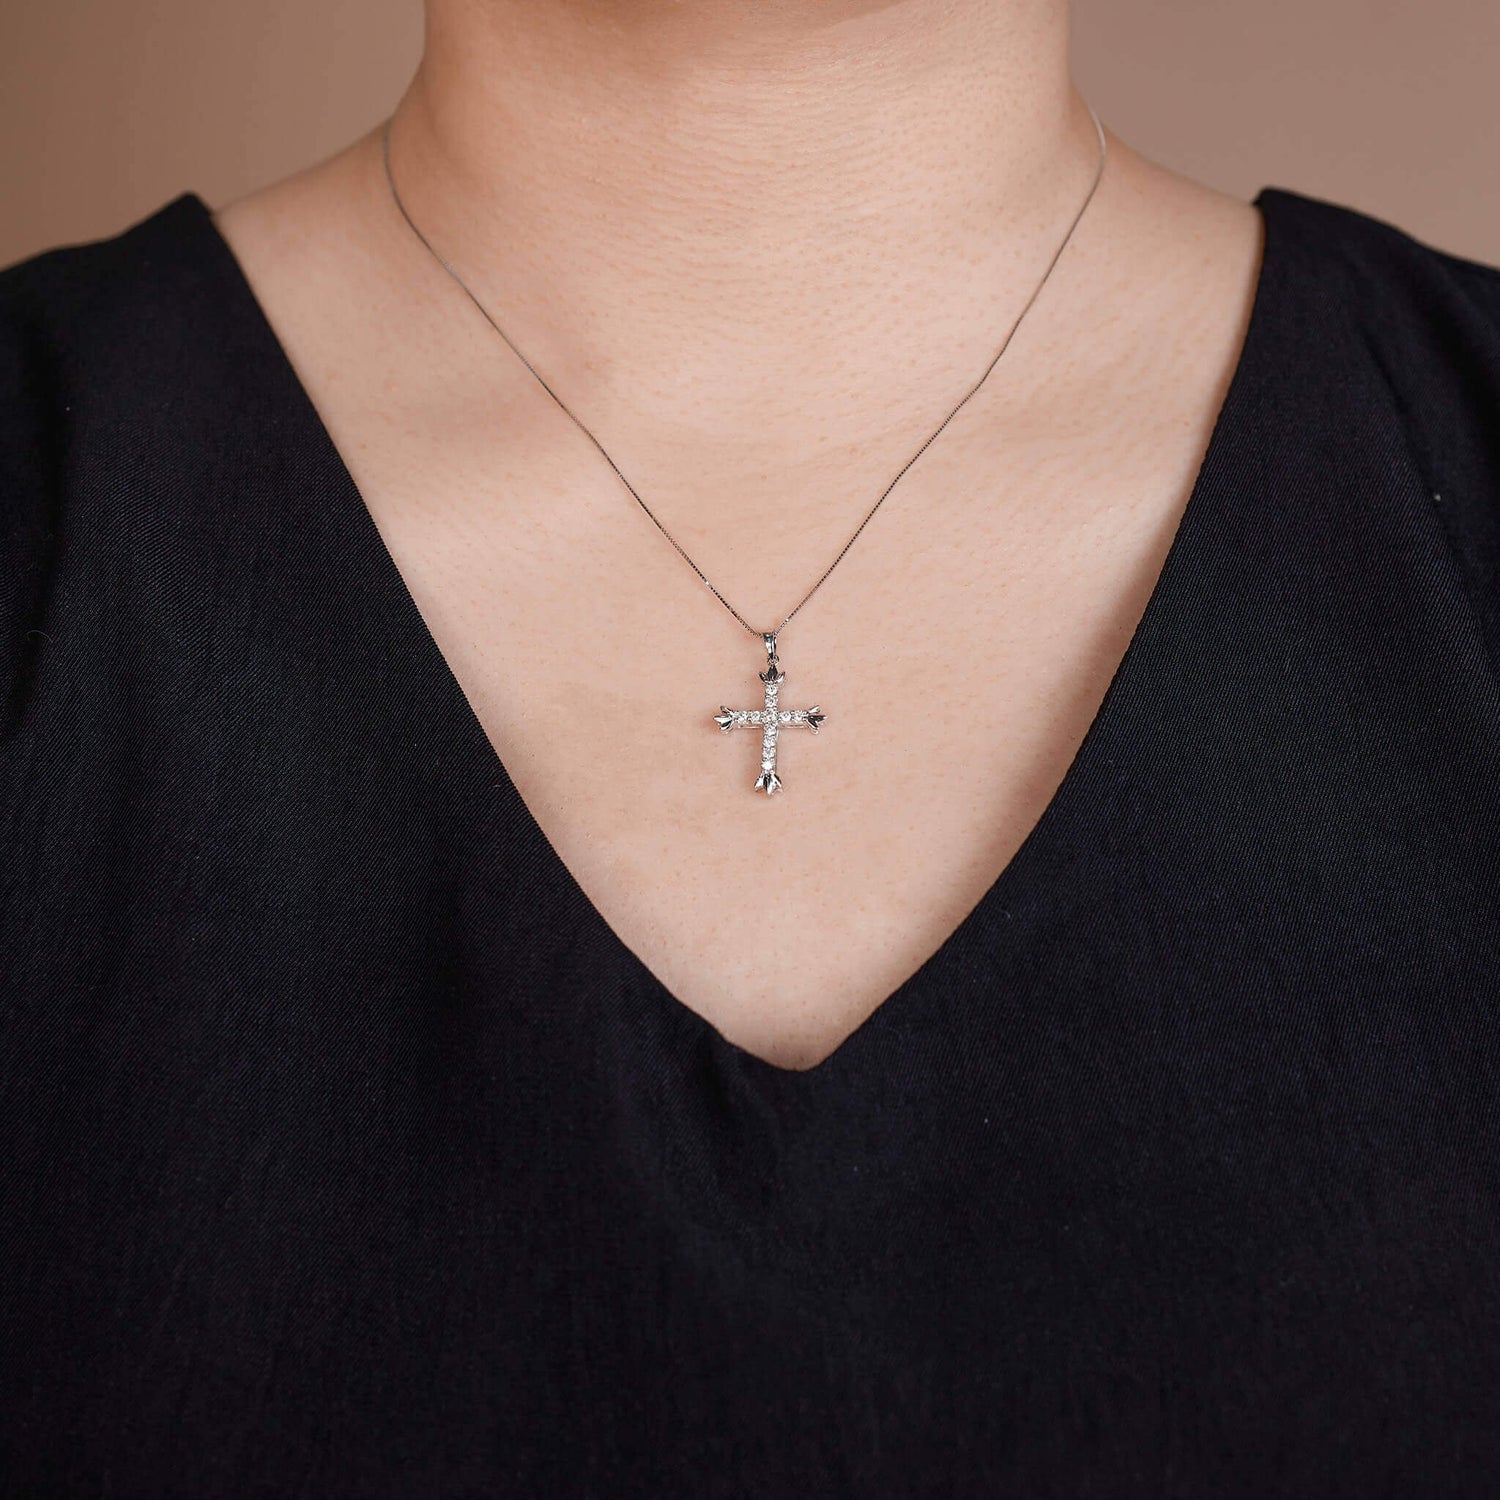 18K Gold Vintage-Styled Cross Pendant with Natural Diamond